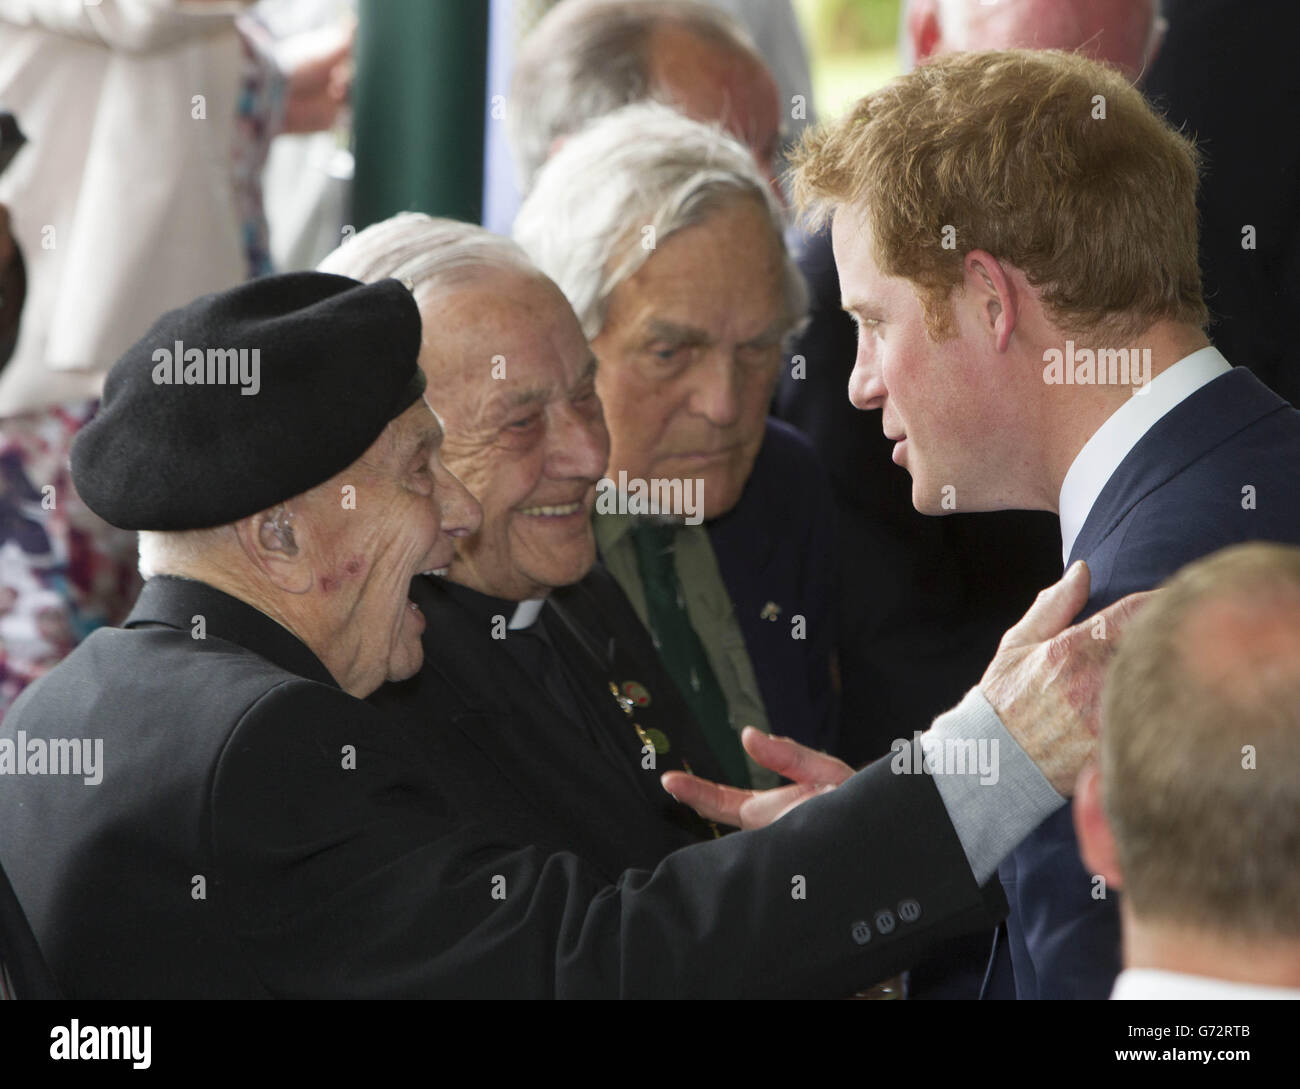 Prince Harry attends the British commemoration reception at the Hotel Rocca in Cassino and speaks with WWII veterans; the event commemorates the 70th Anniversary of the Battles of Monte Cassino, acknowledging the British and Commonwealth contribution to the successful conclusion of the battles in this area. Stock Photo